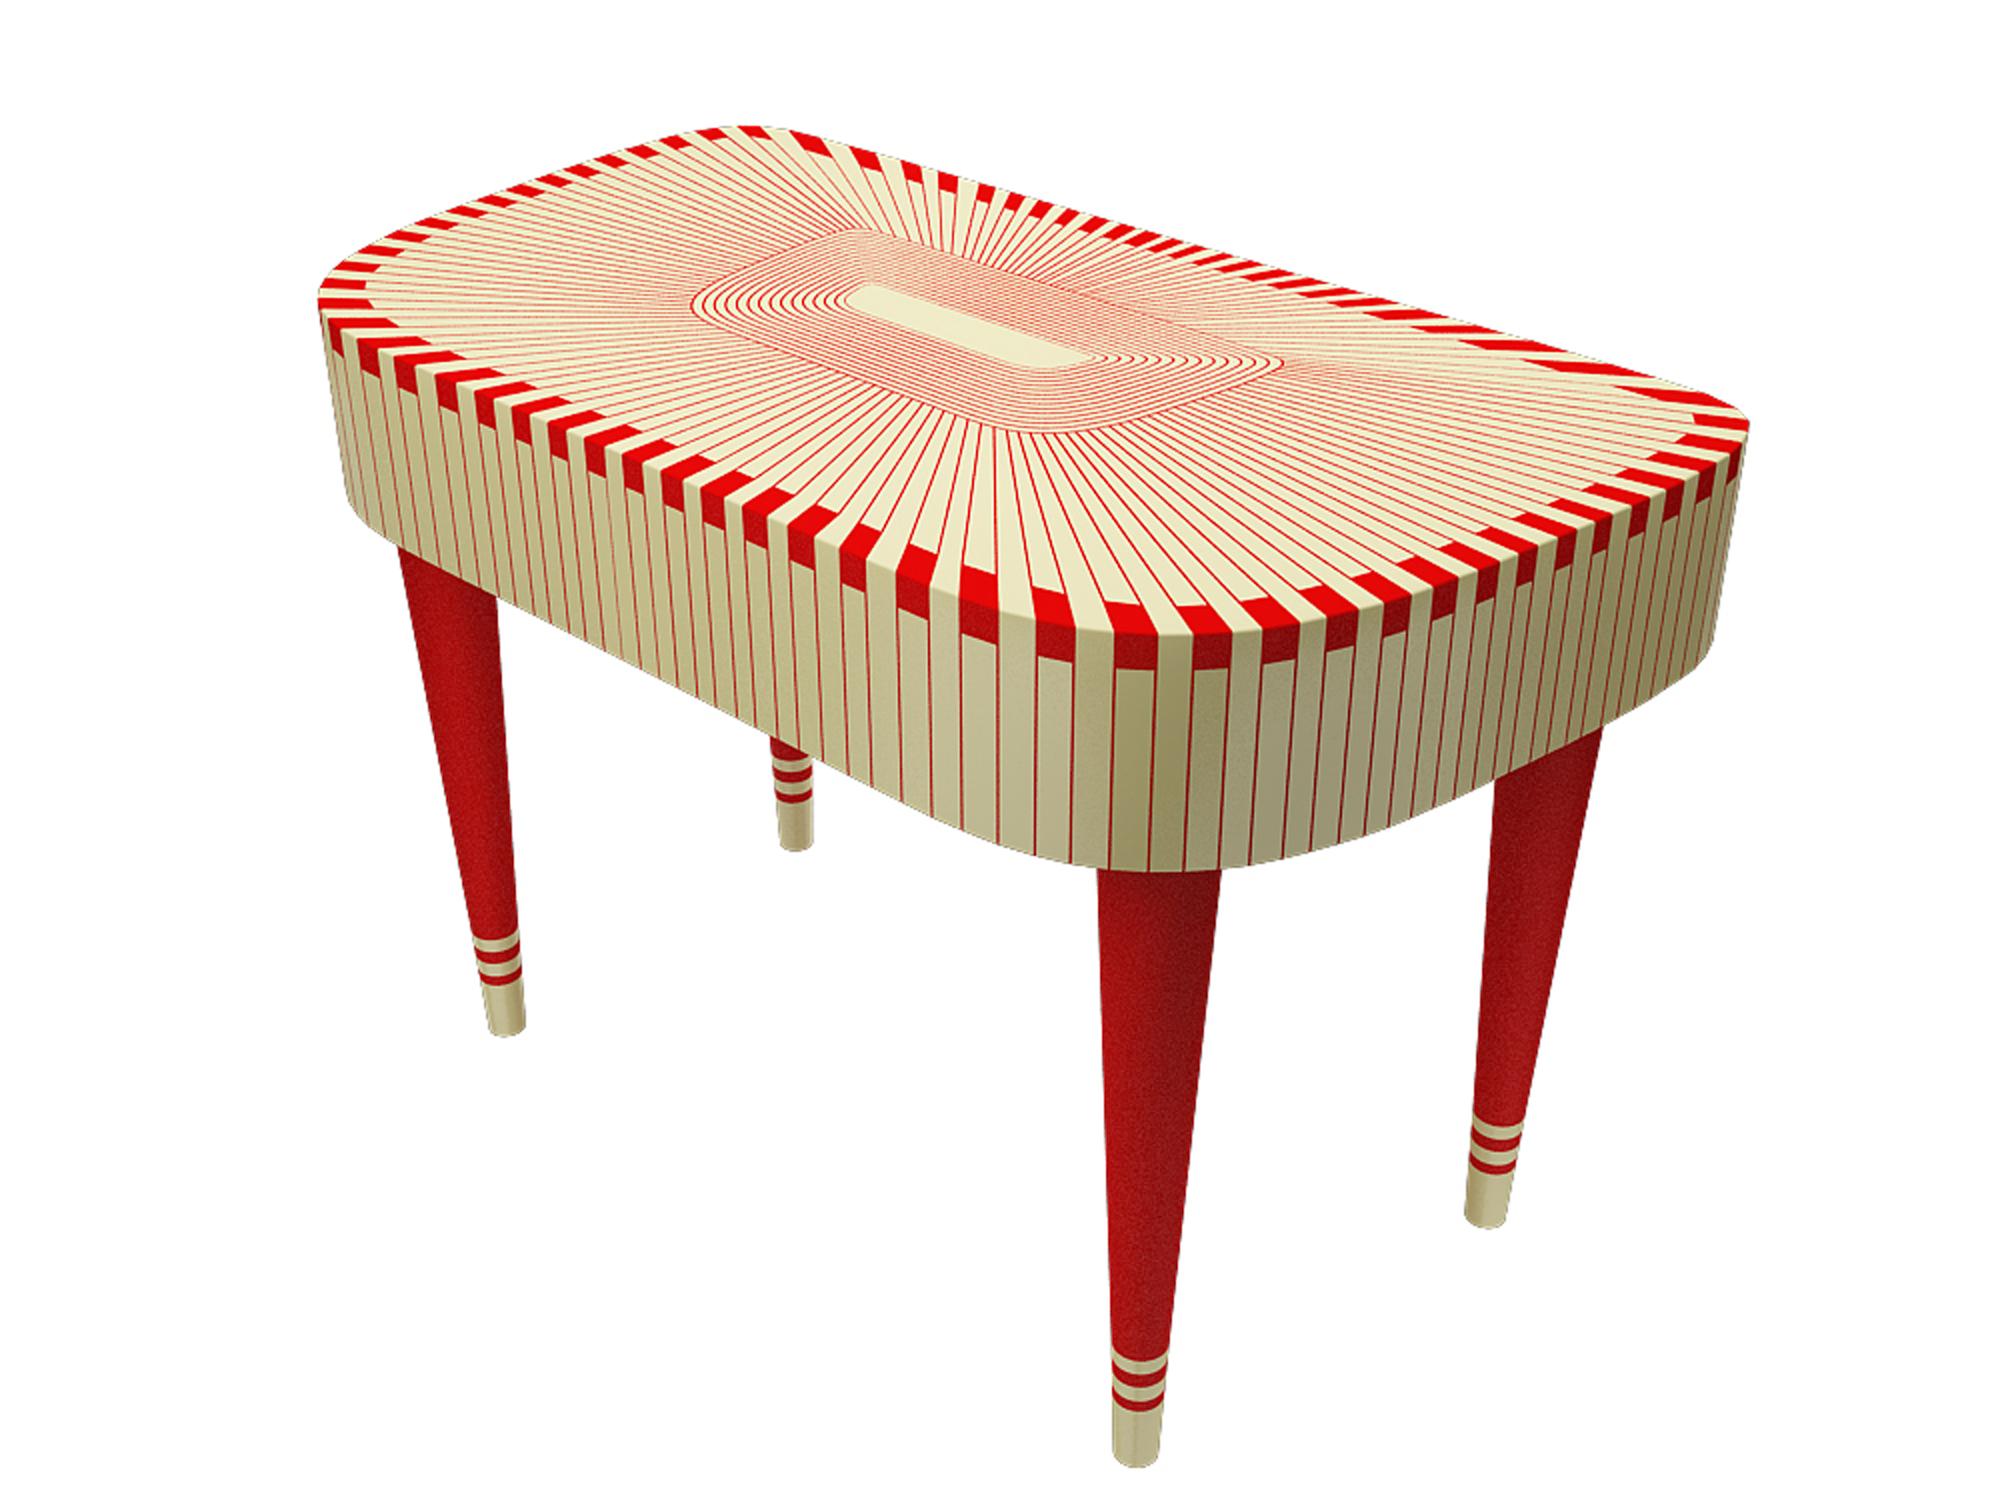 Paris Bureau Red and White Study Desk Writing Table by Matteo Cibic is an extraordinary console/writing table, with two drawers. It is available in a range of colors, which can be customized according to the space.

India's handicrafts are as